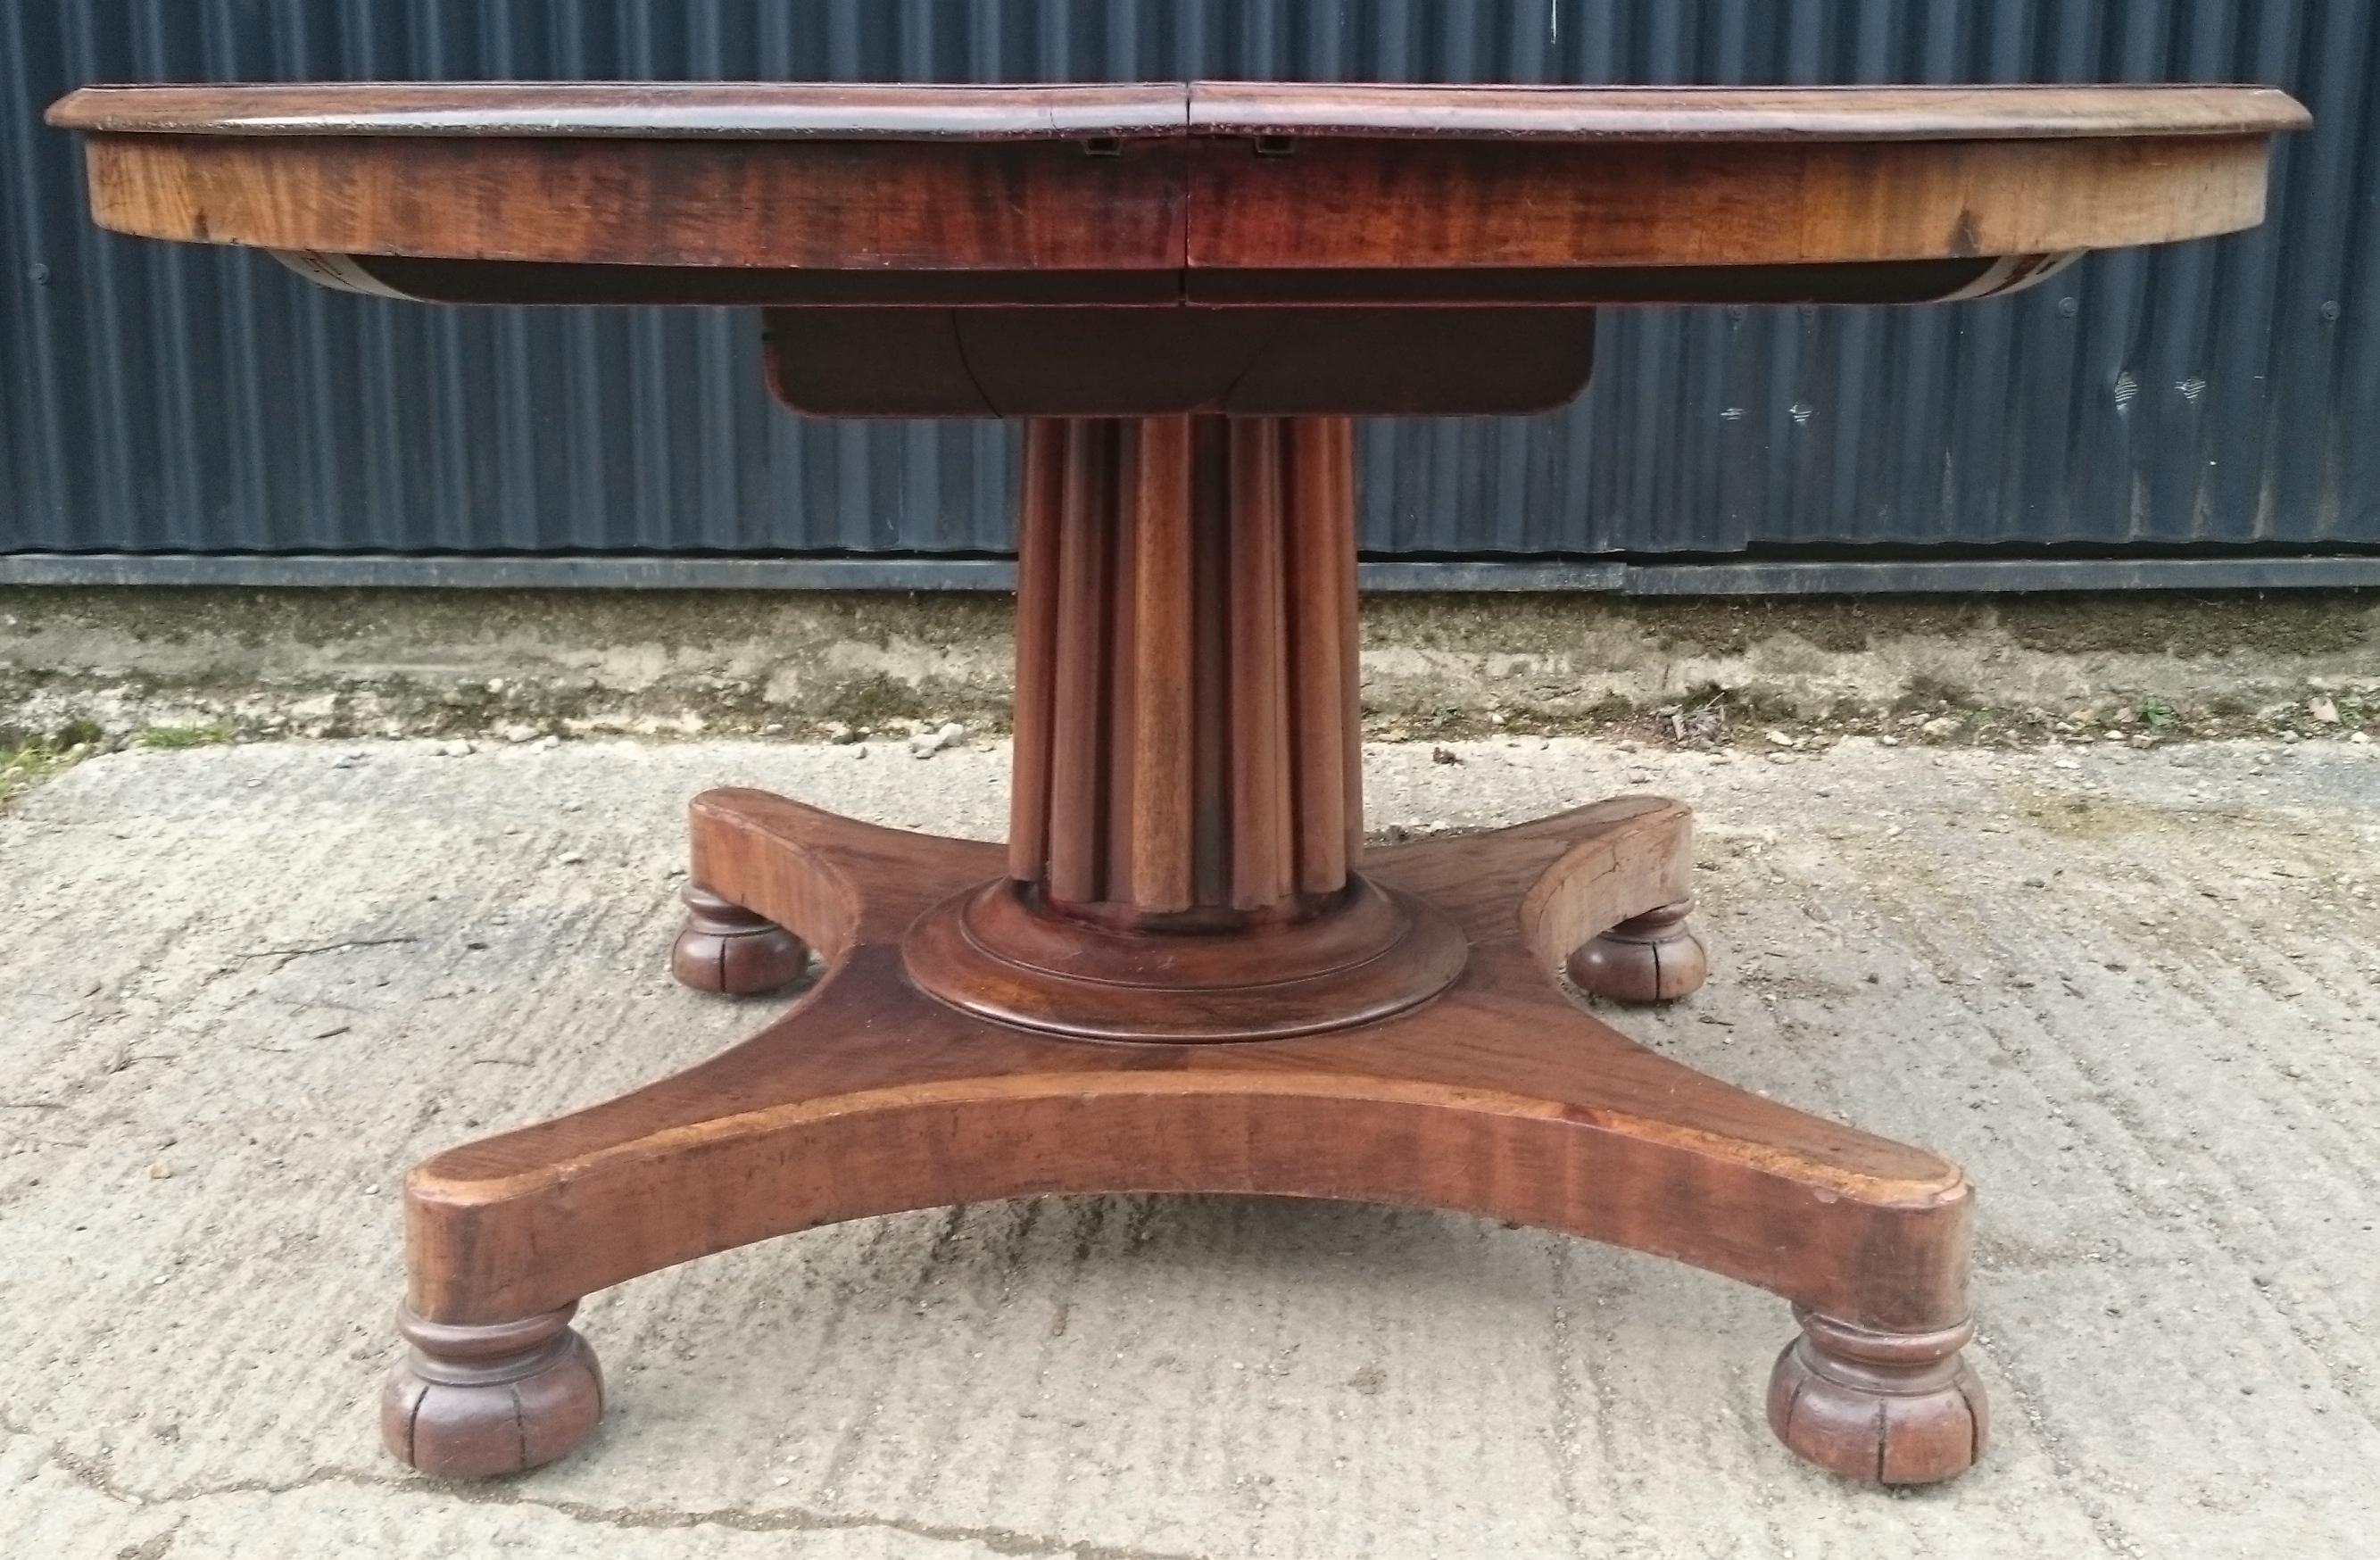 19th century mahogany antique dining table which extends to take two additional leaves to make it six feet long. This table has an unusually pretty reeded column support standing on the slender base and the frieze is good and narrow to give maximum